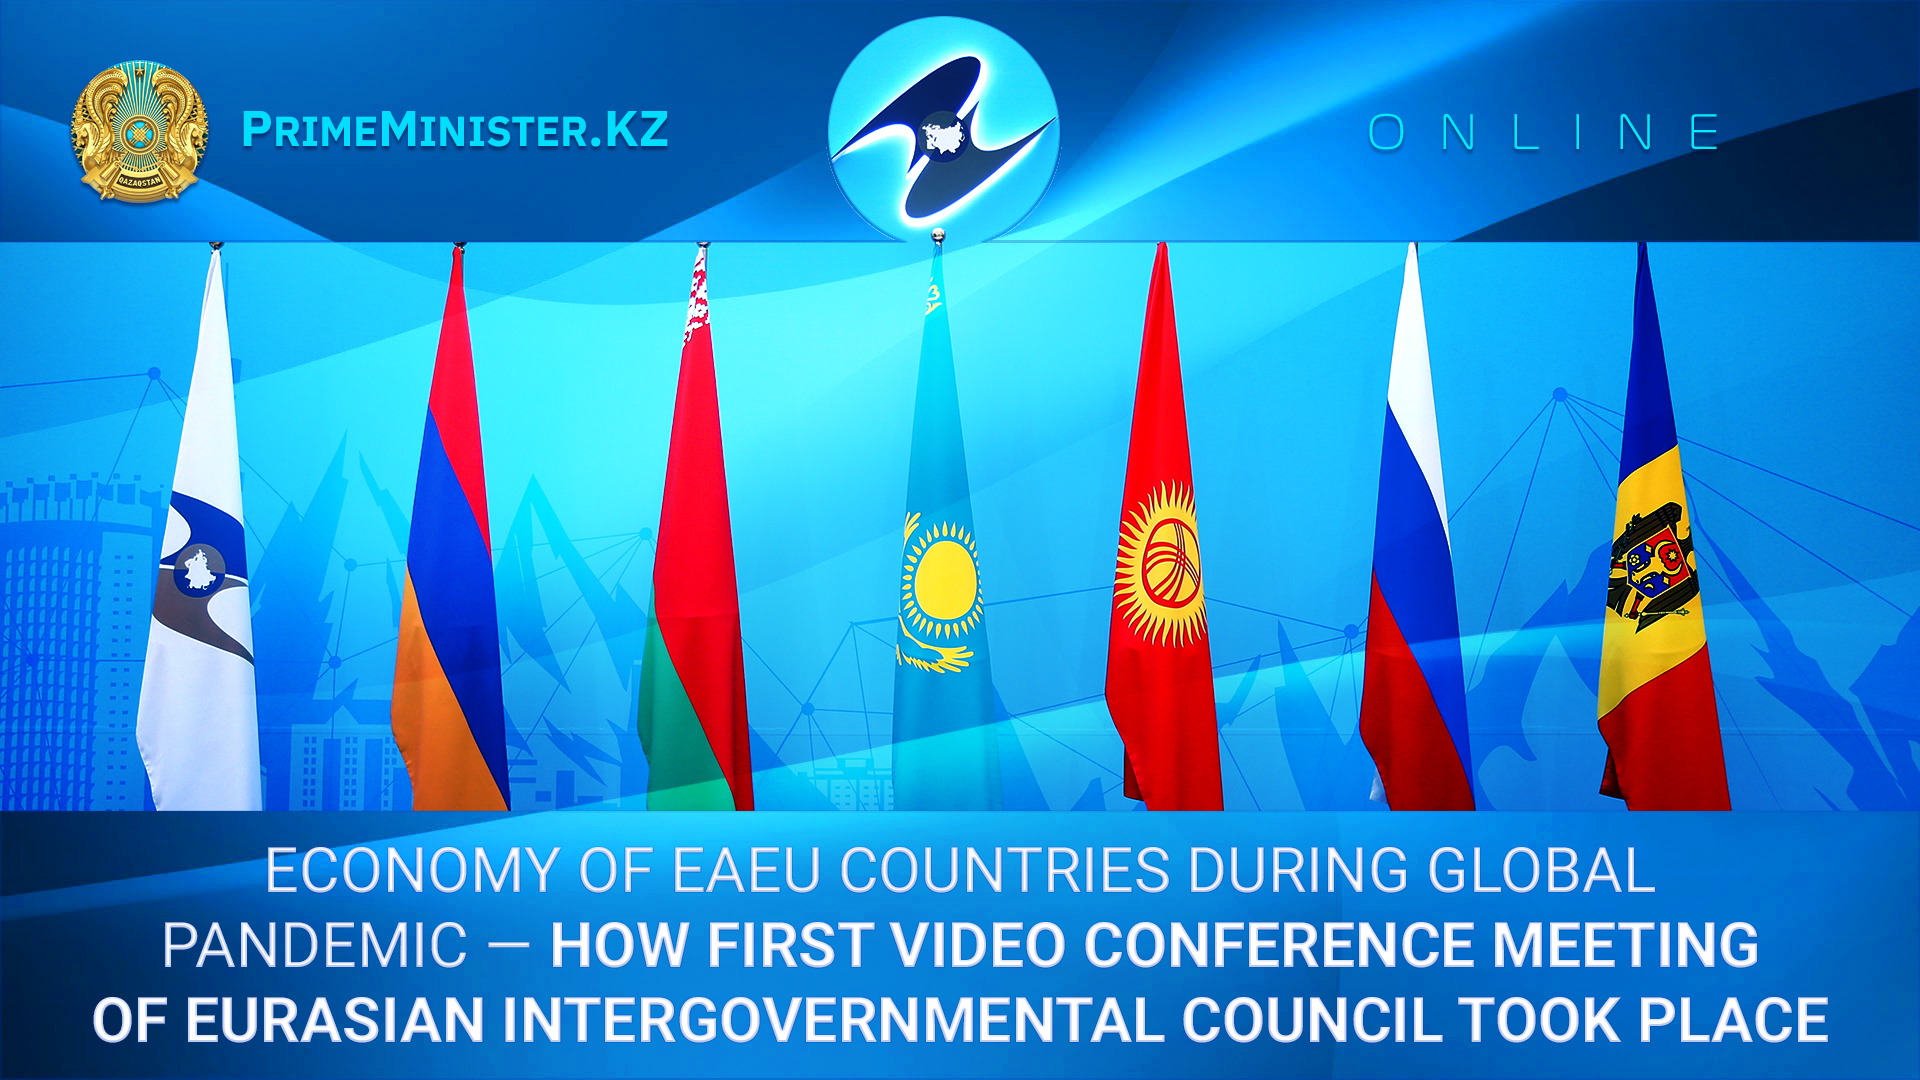 Eurasian Intergovernmental Council hosts first video conference meeting